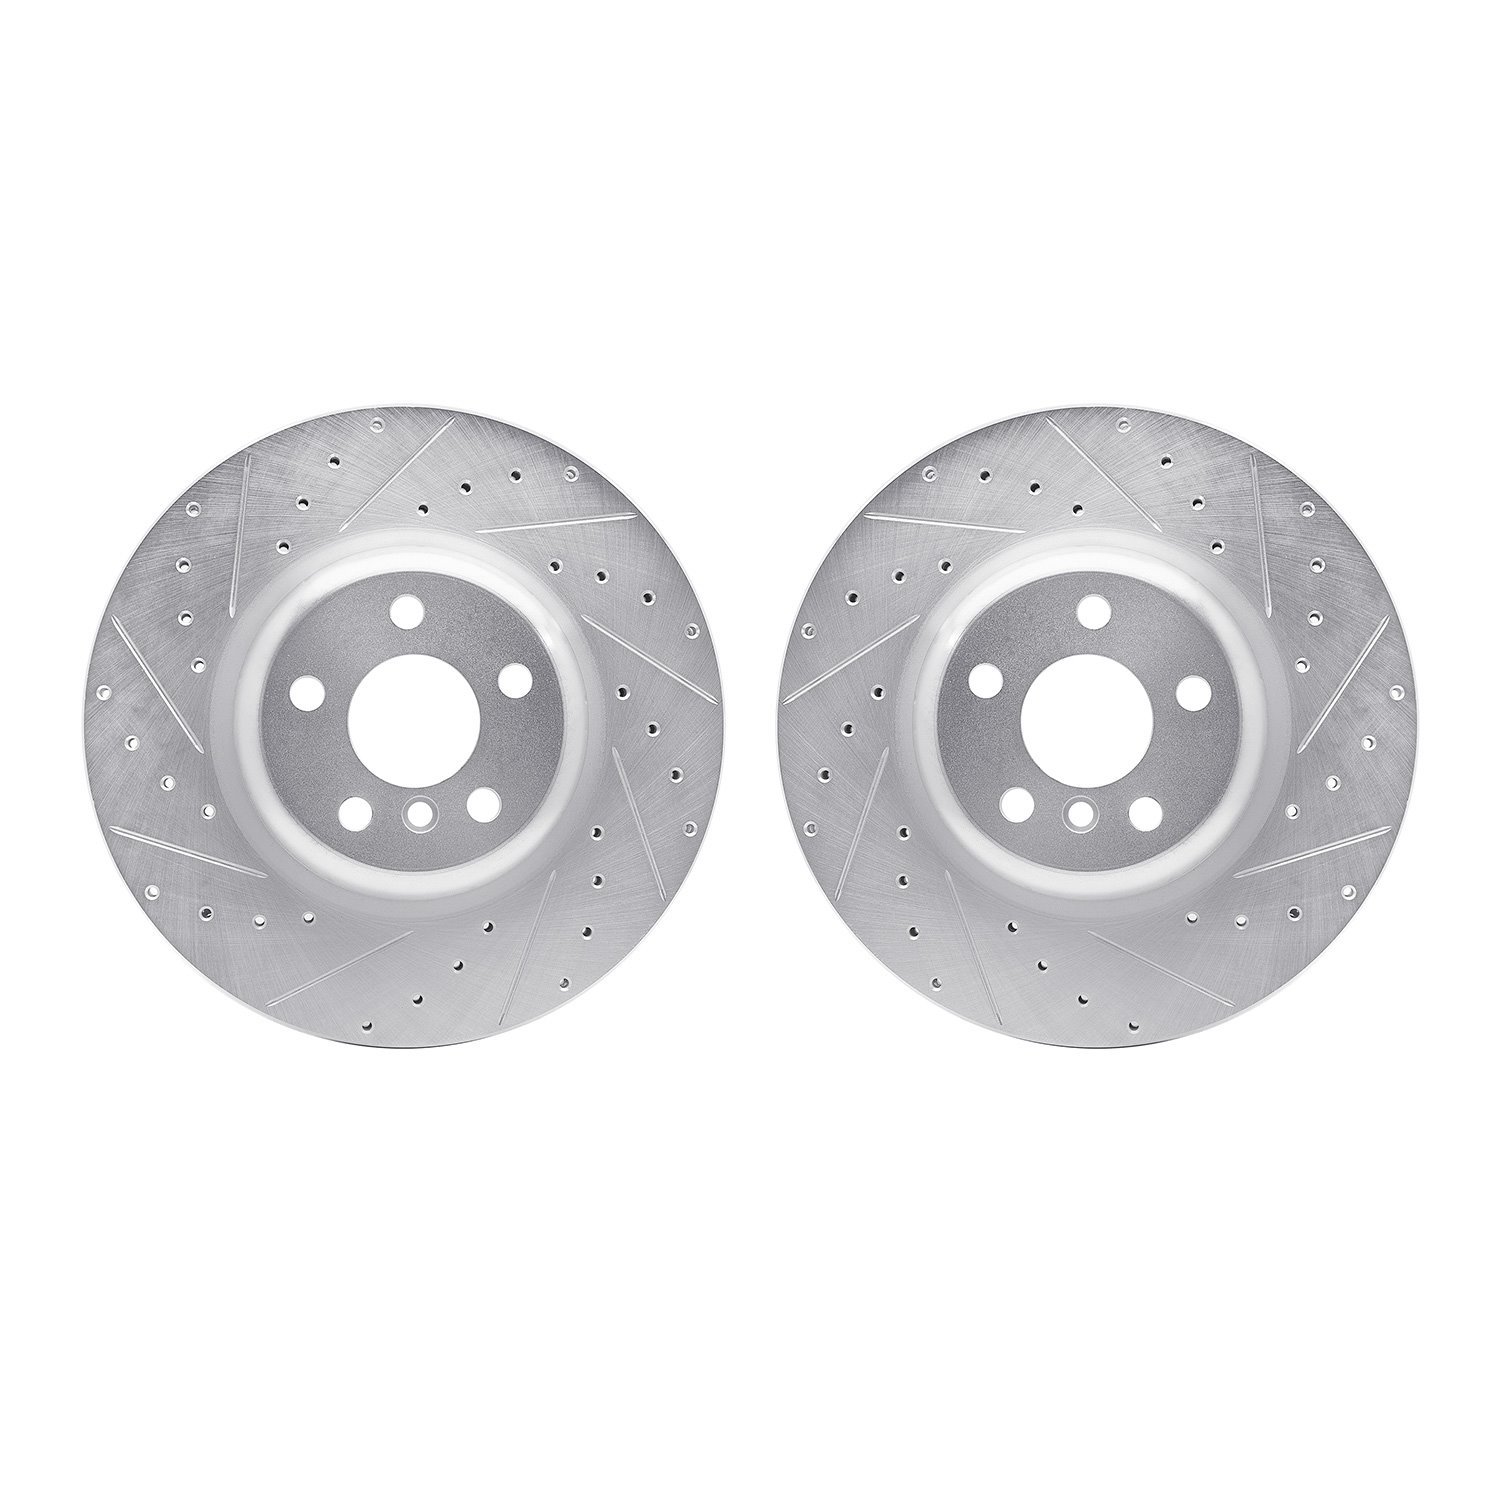 7002-31090 Drilled/Slotted Brake Rotors [Silver], Fits Select Multiple Makes/Models, Position: Rear